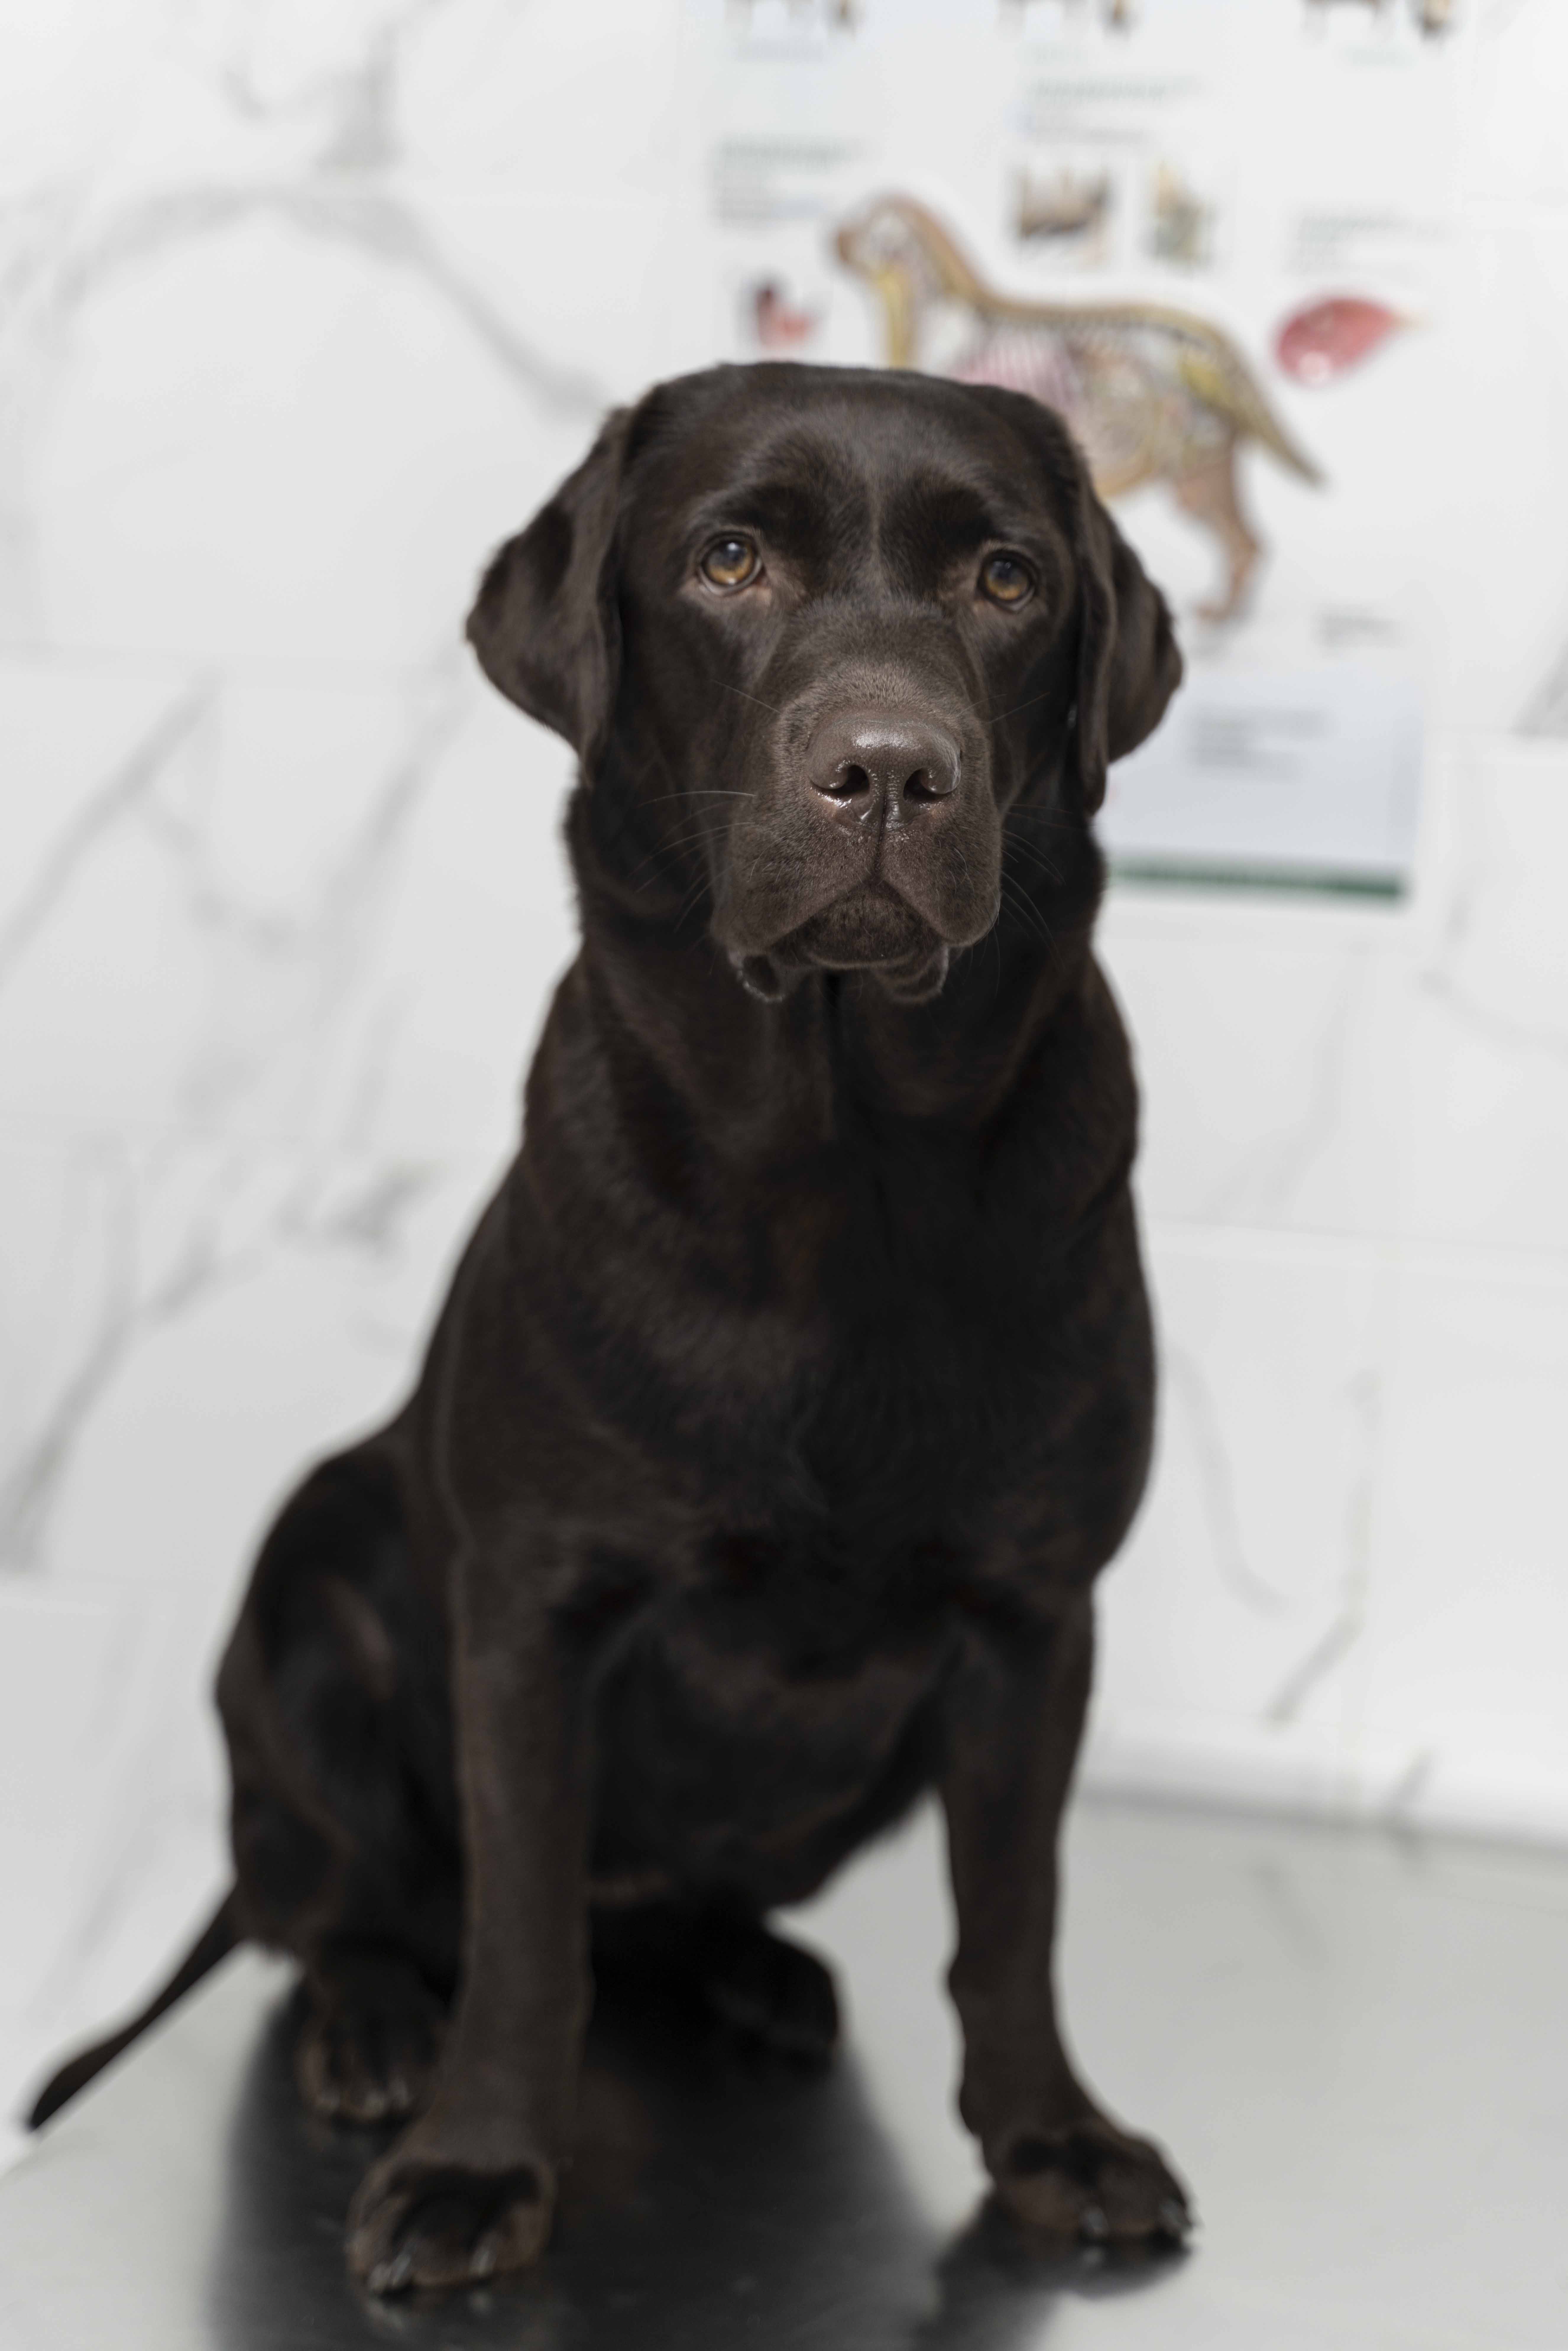 a black dog sitting on a white surface